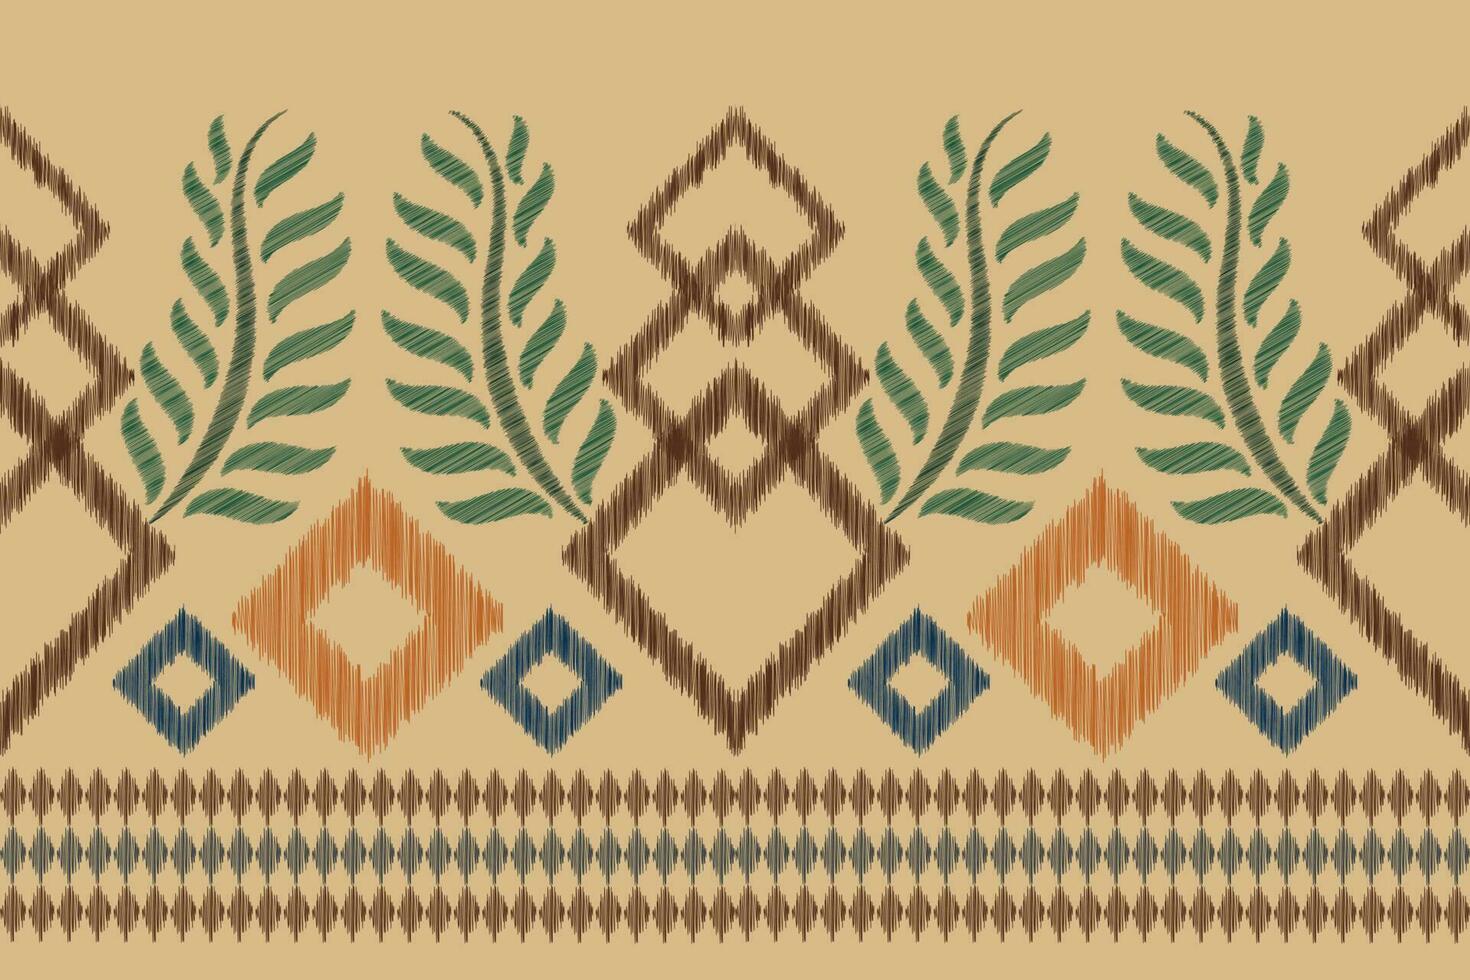 Ethnic Ikat fabric pattern geometric style.African Ikat embroidery Ethnic oriental pattern brown cream background. Abstract,vector,illustration.For texture,clothing,scraf,decoration,carpet,silk. vector